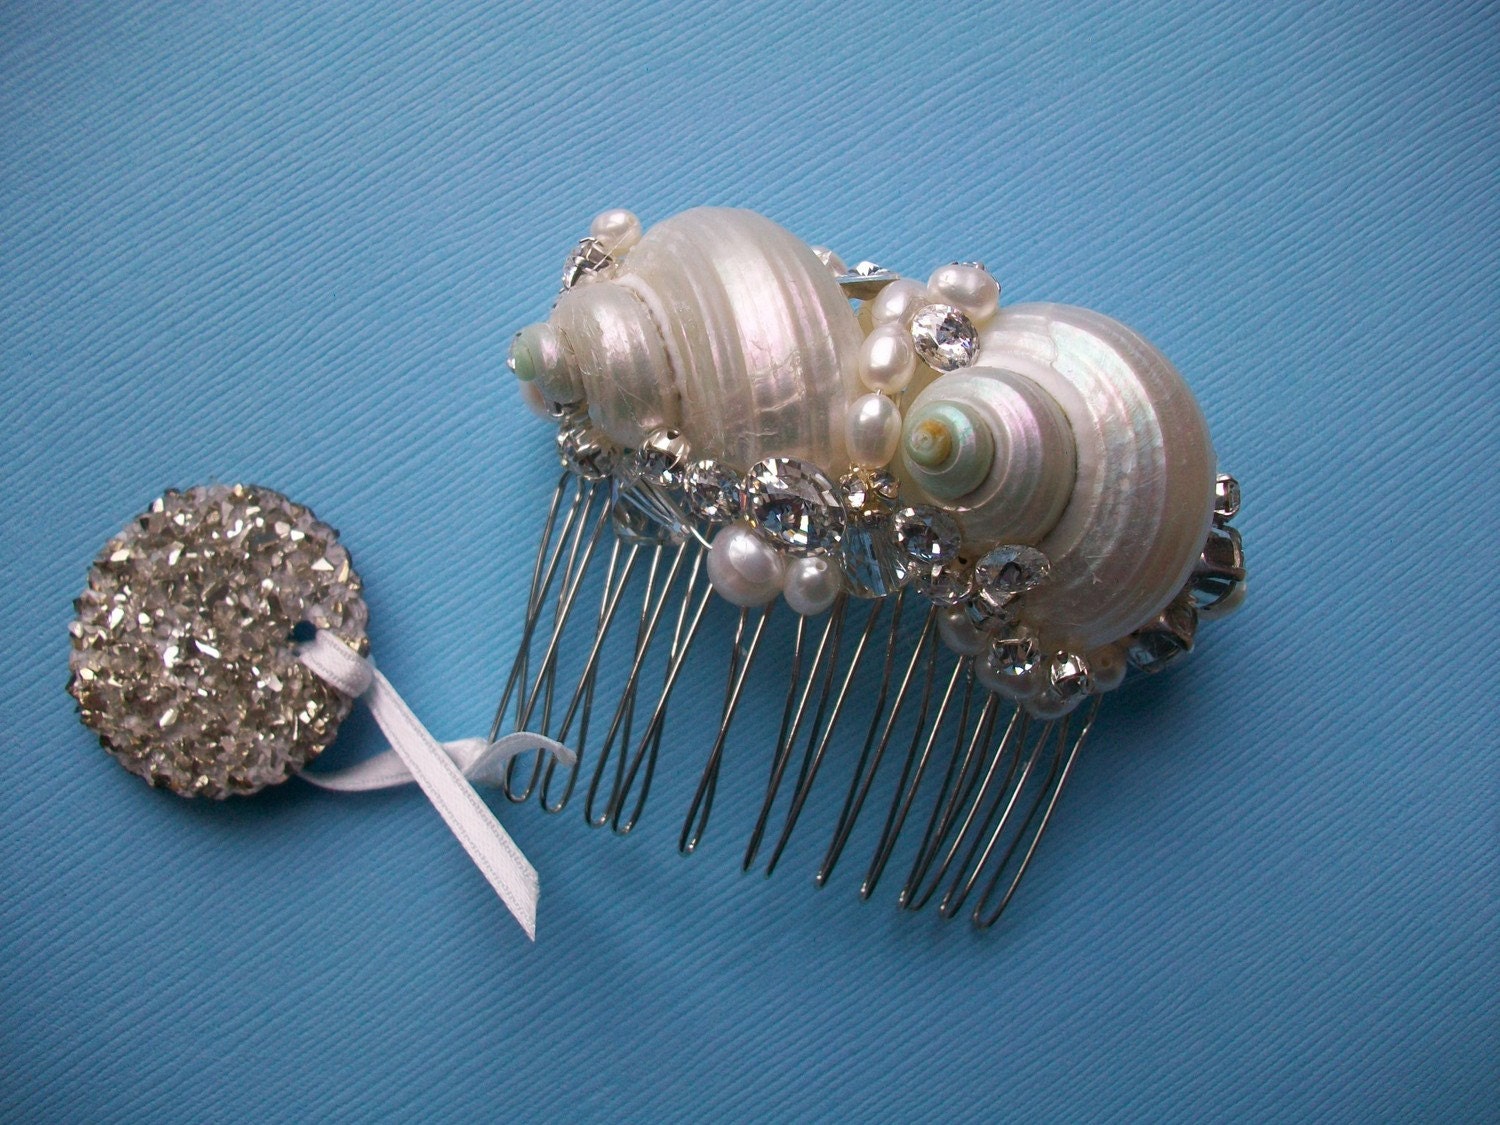 Pearlized Sea Shell Bridal Hair Comb With Swarovski Crystals And Freshwater Pearls